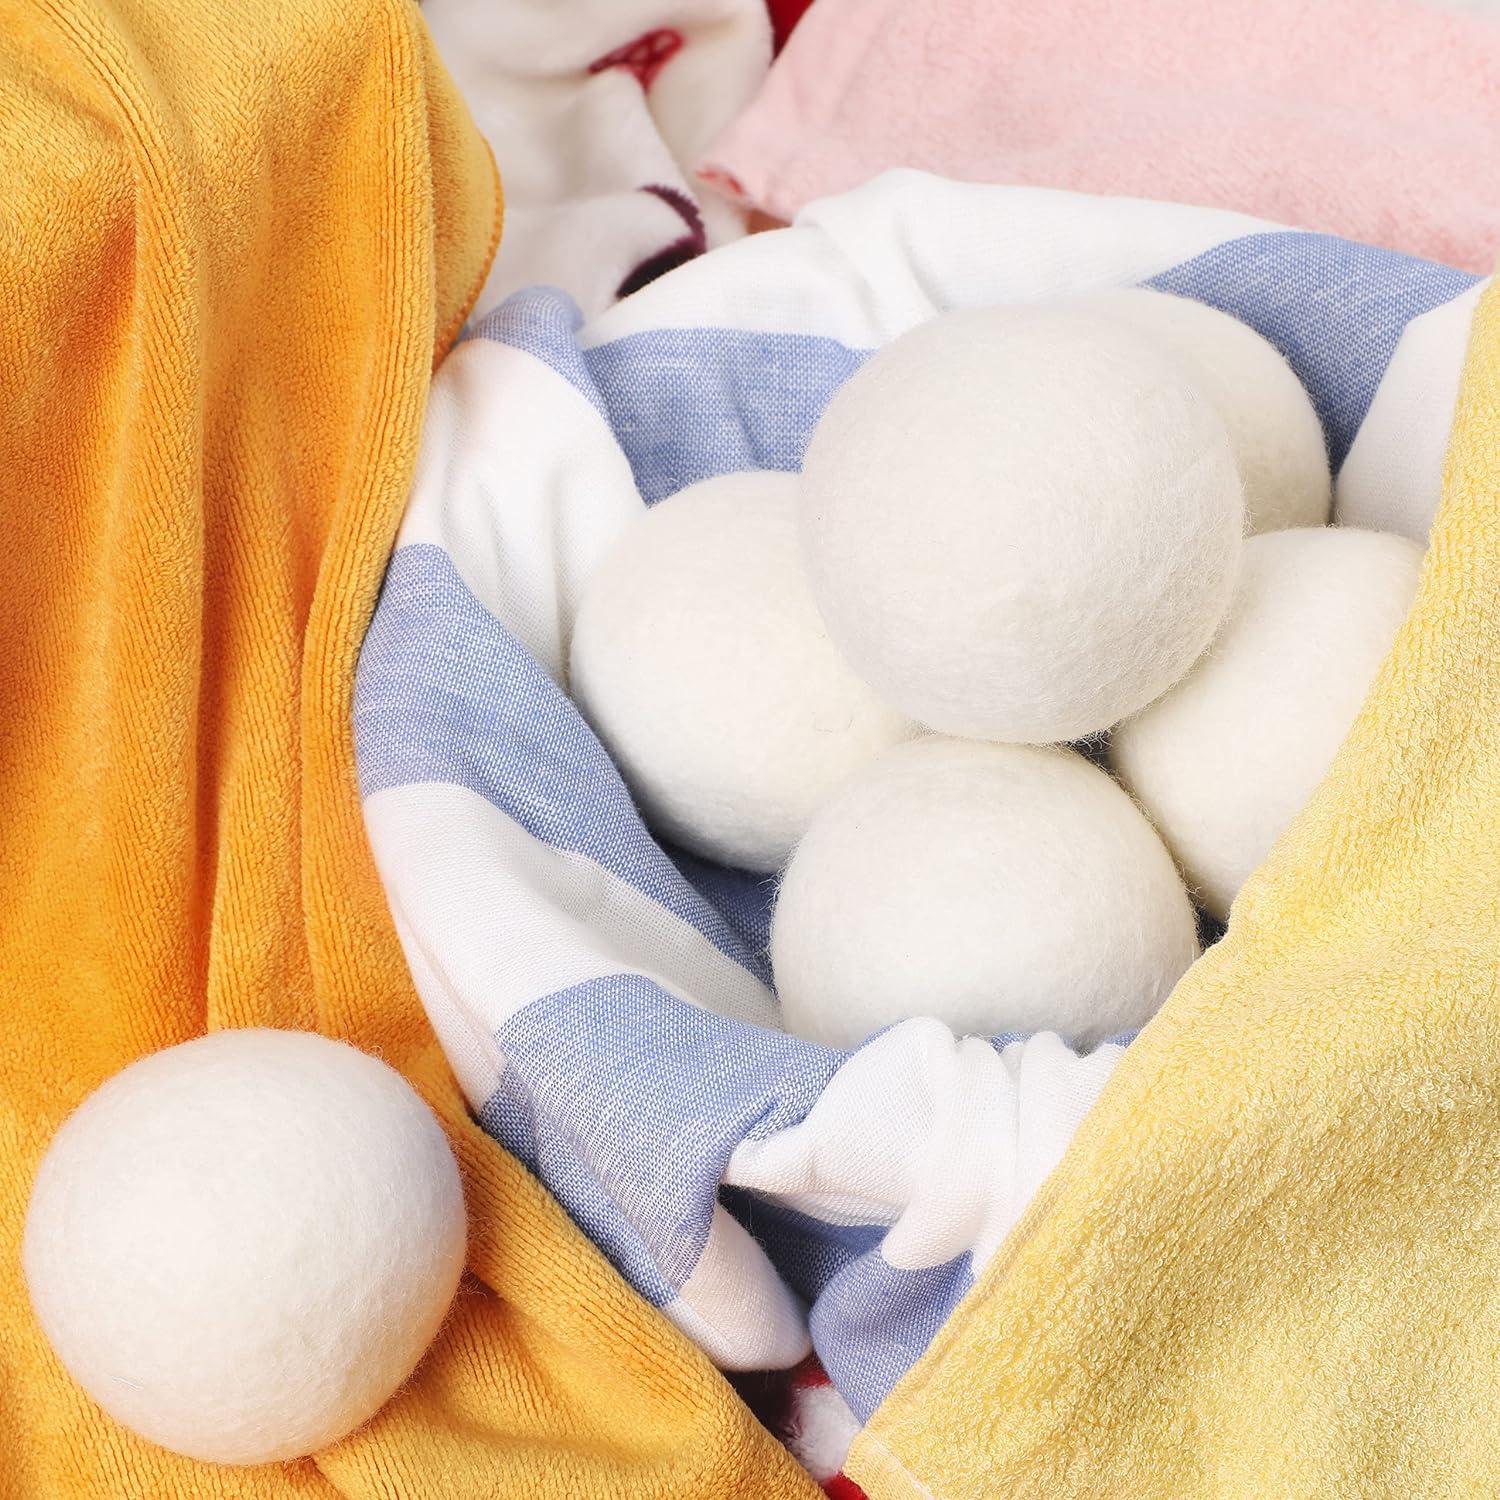 6 Pack All Natural Organic Wool Dryer Balls XL Size - Reusable Chemical  Free Natural Fabric Softener, Anti Static, Reduces Clothing Wrinkles and  Saves